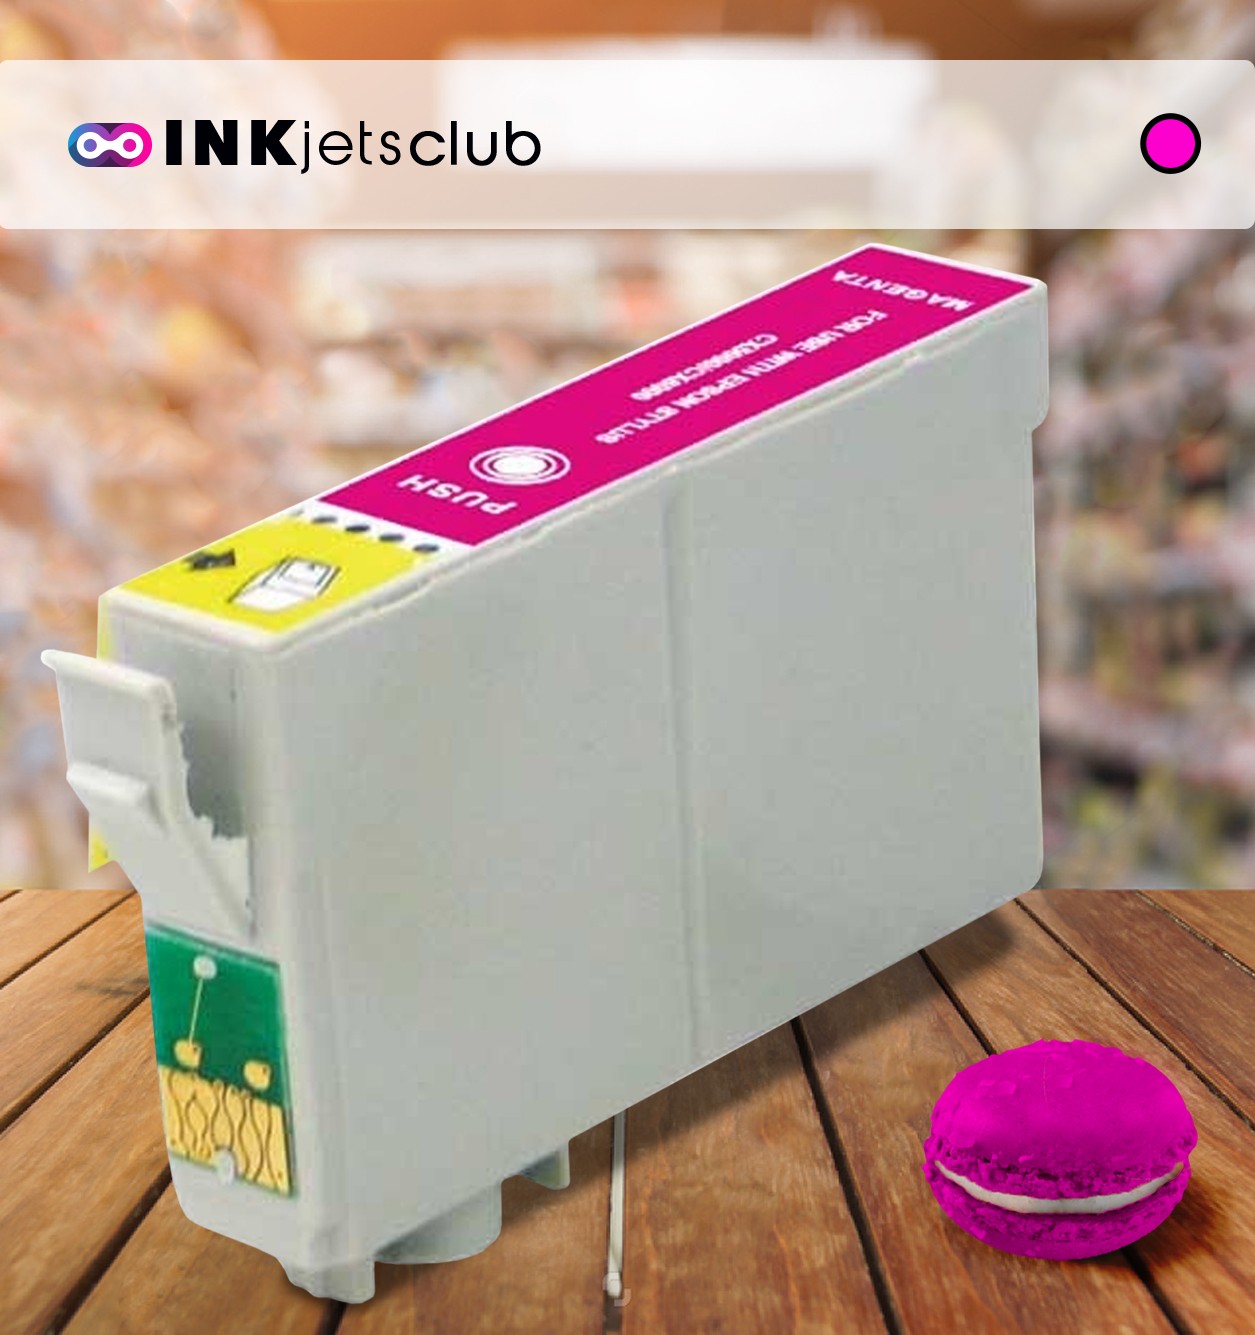 Epson T0613 (C13T06134010) Magenta, High Quality Remanufactured Ink Cartridge